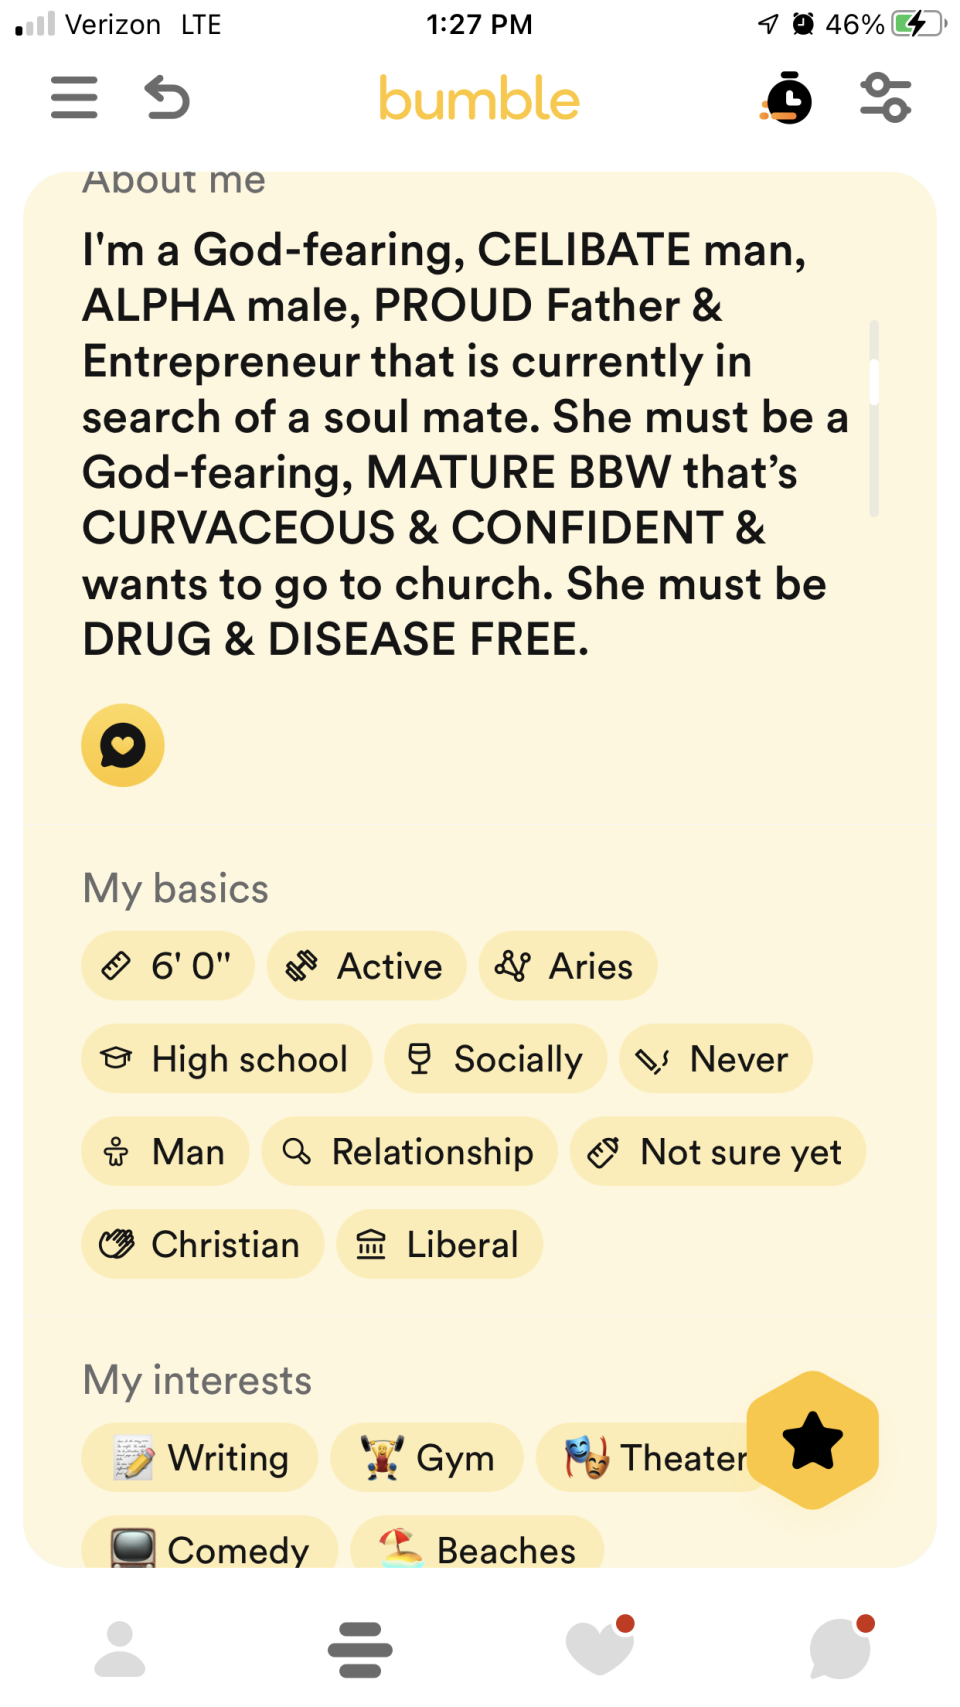 This about me section says he is a "god-fearing, celibate alpha male" looking for a soul mate who is "a god-fearing, mature BBW who is curvaceous and confident, wants to go to church, and is drug and disease free"